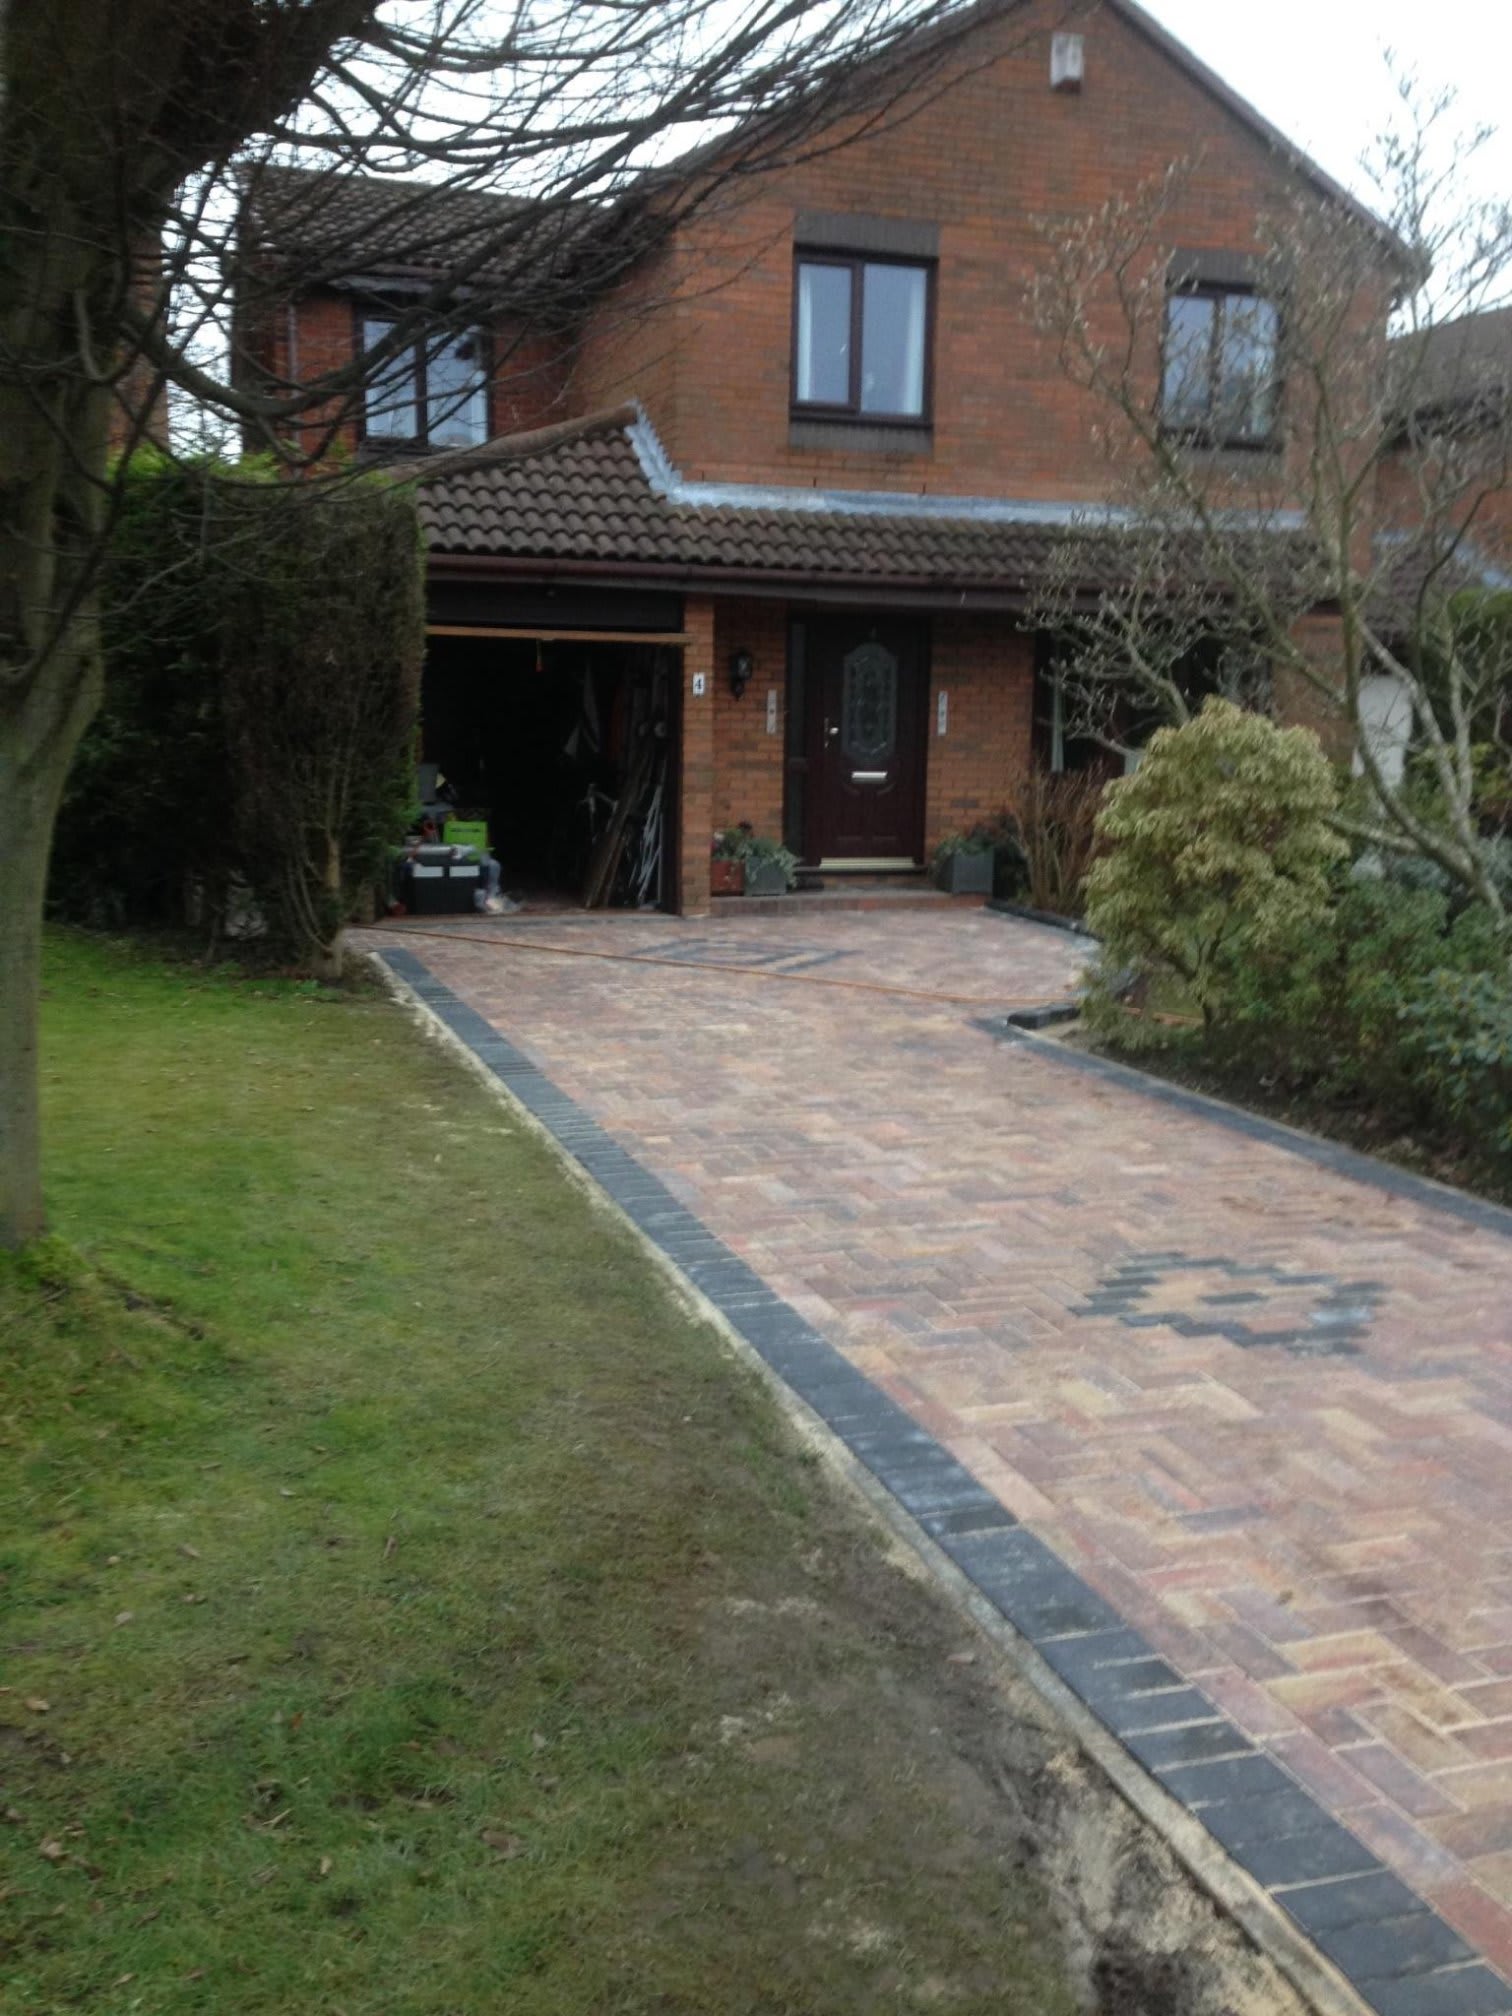 Images J Lowther & Sons Driveways & Building Services